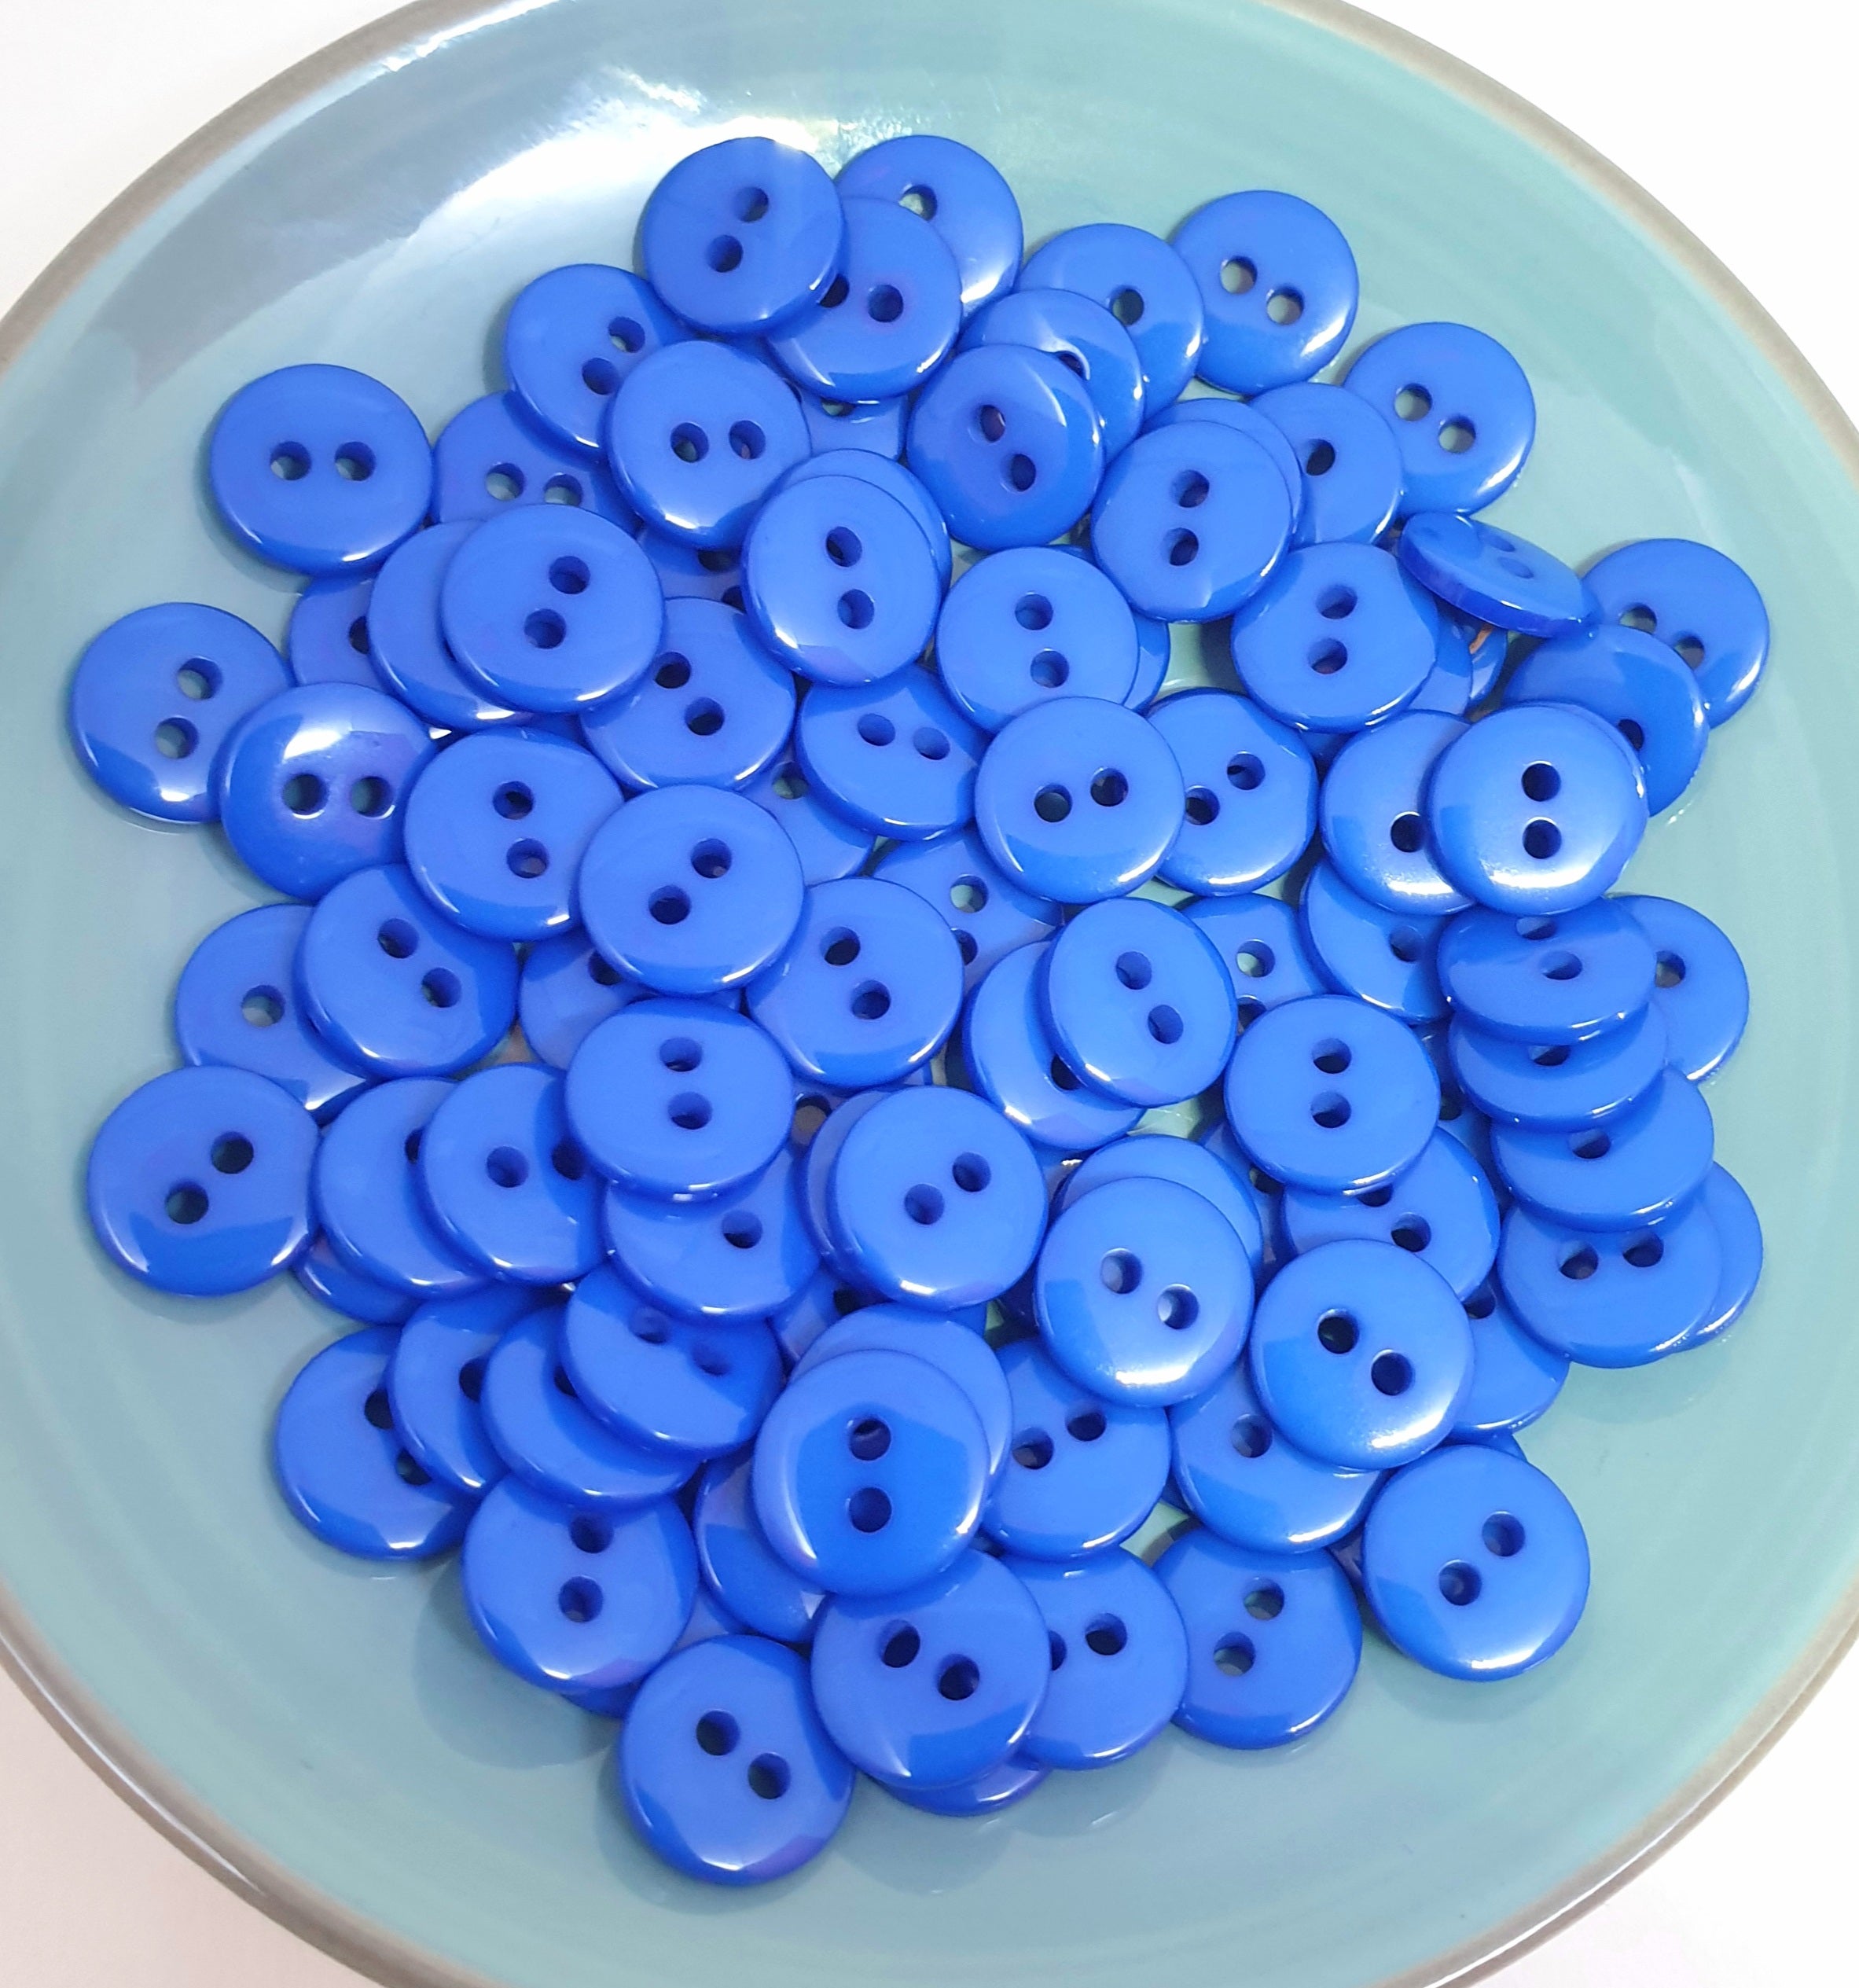 MajorCrafts 120pcs 10mm Royal Blue 2 Holes Small Round Resin Sewing Buttons B21